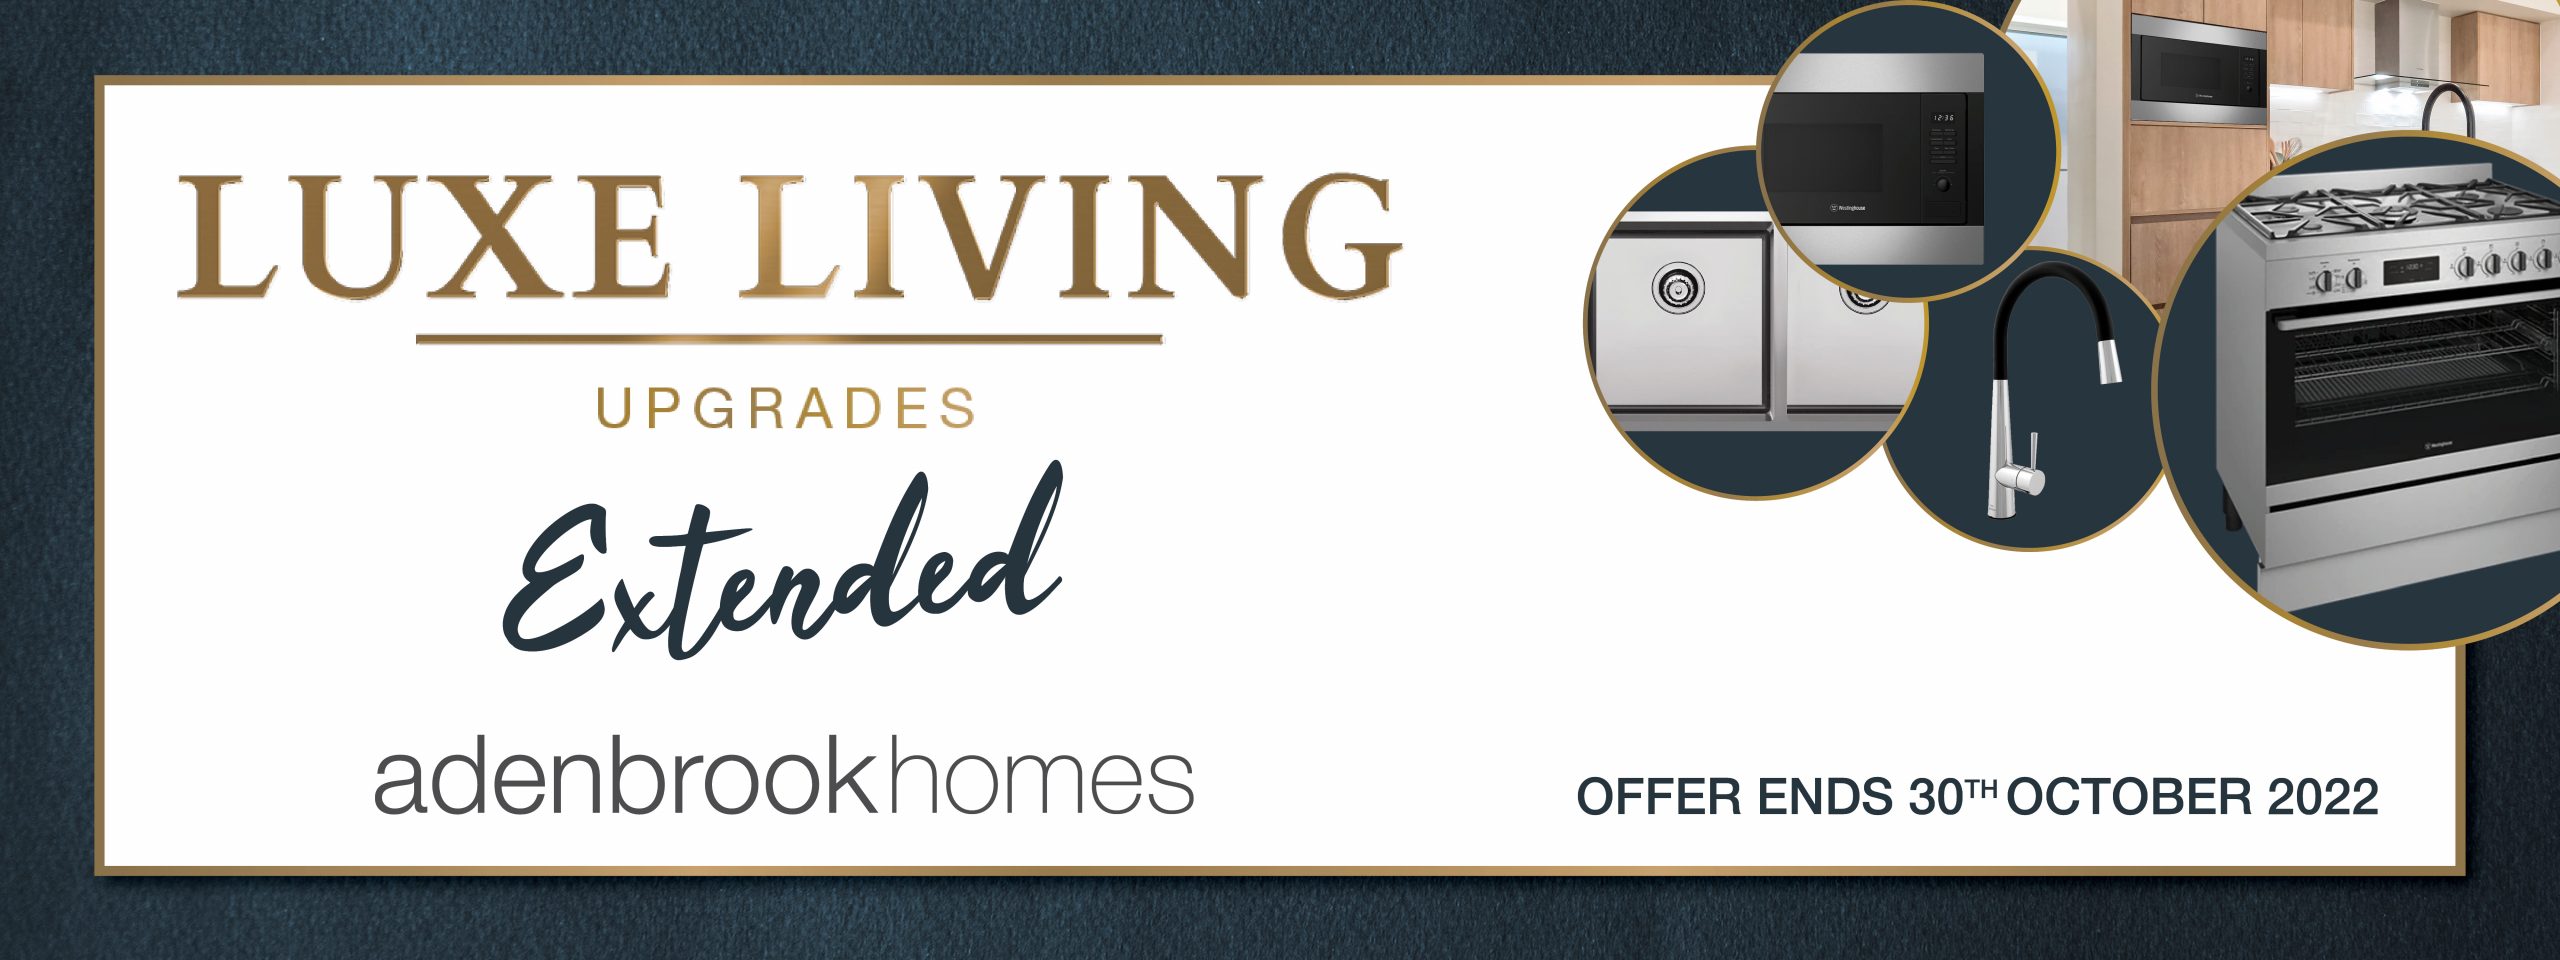 Luxe Living extended 30th october -web banner-promo page